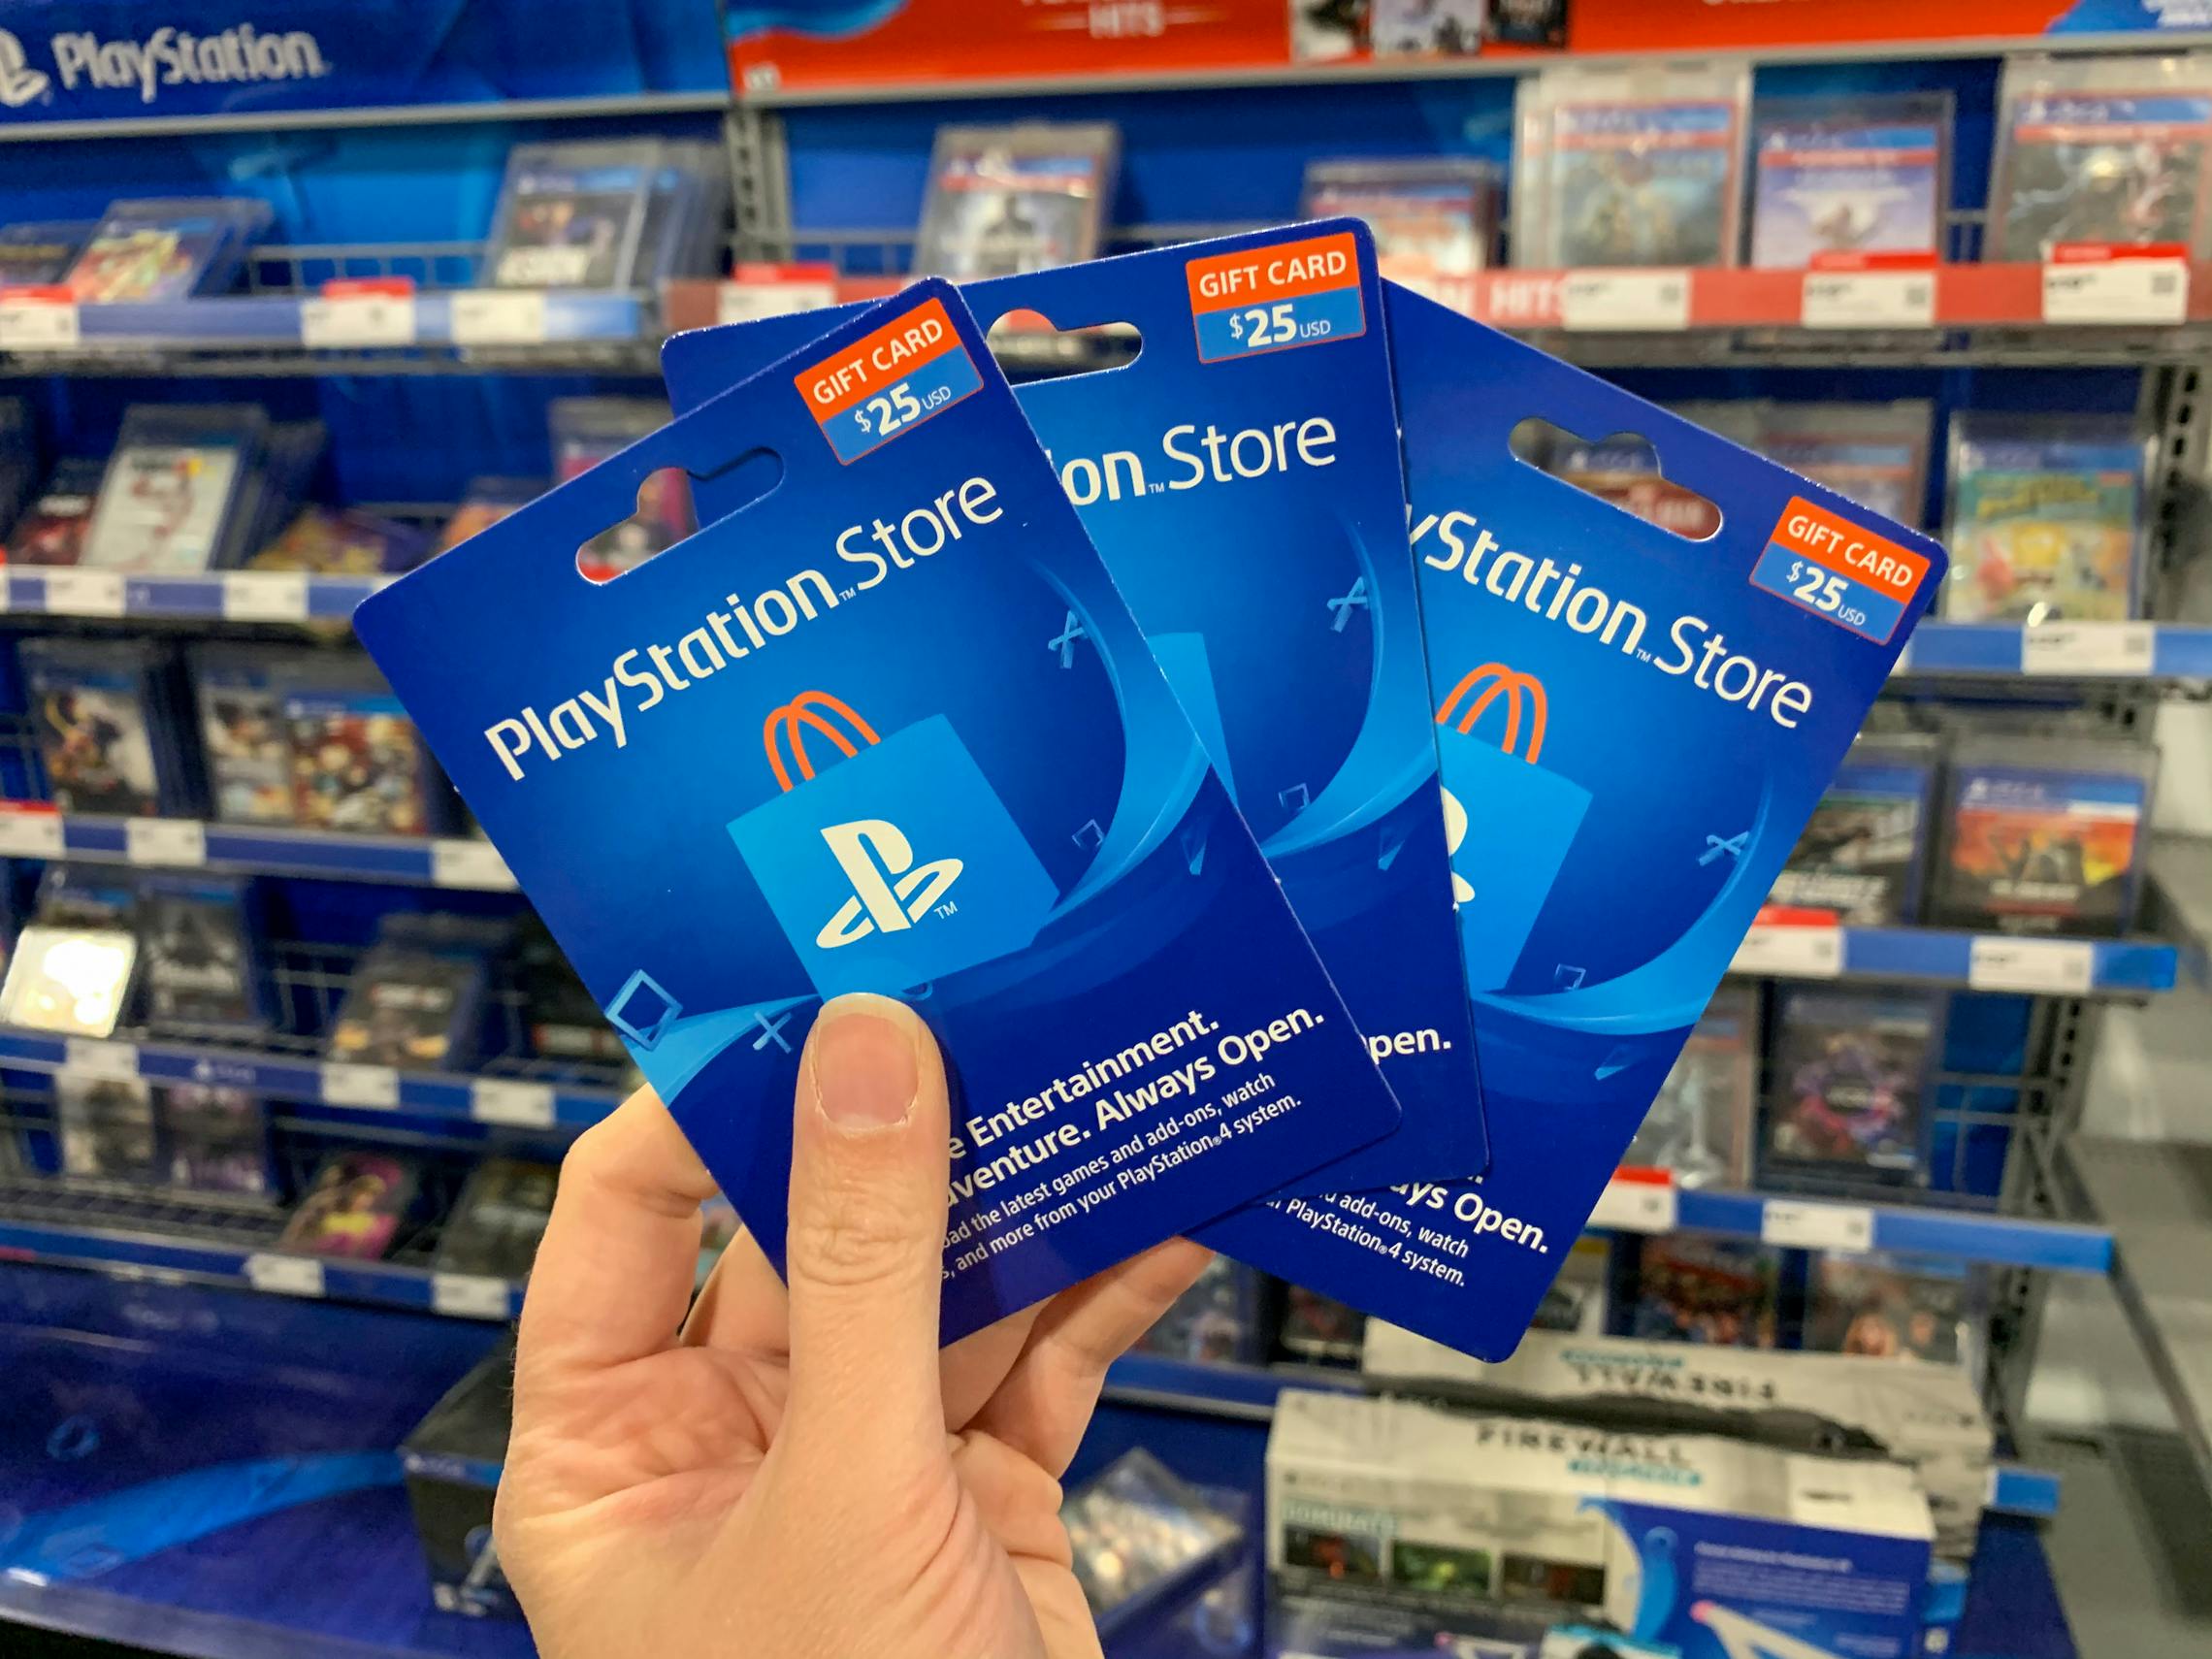 playstation gift card best buy